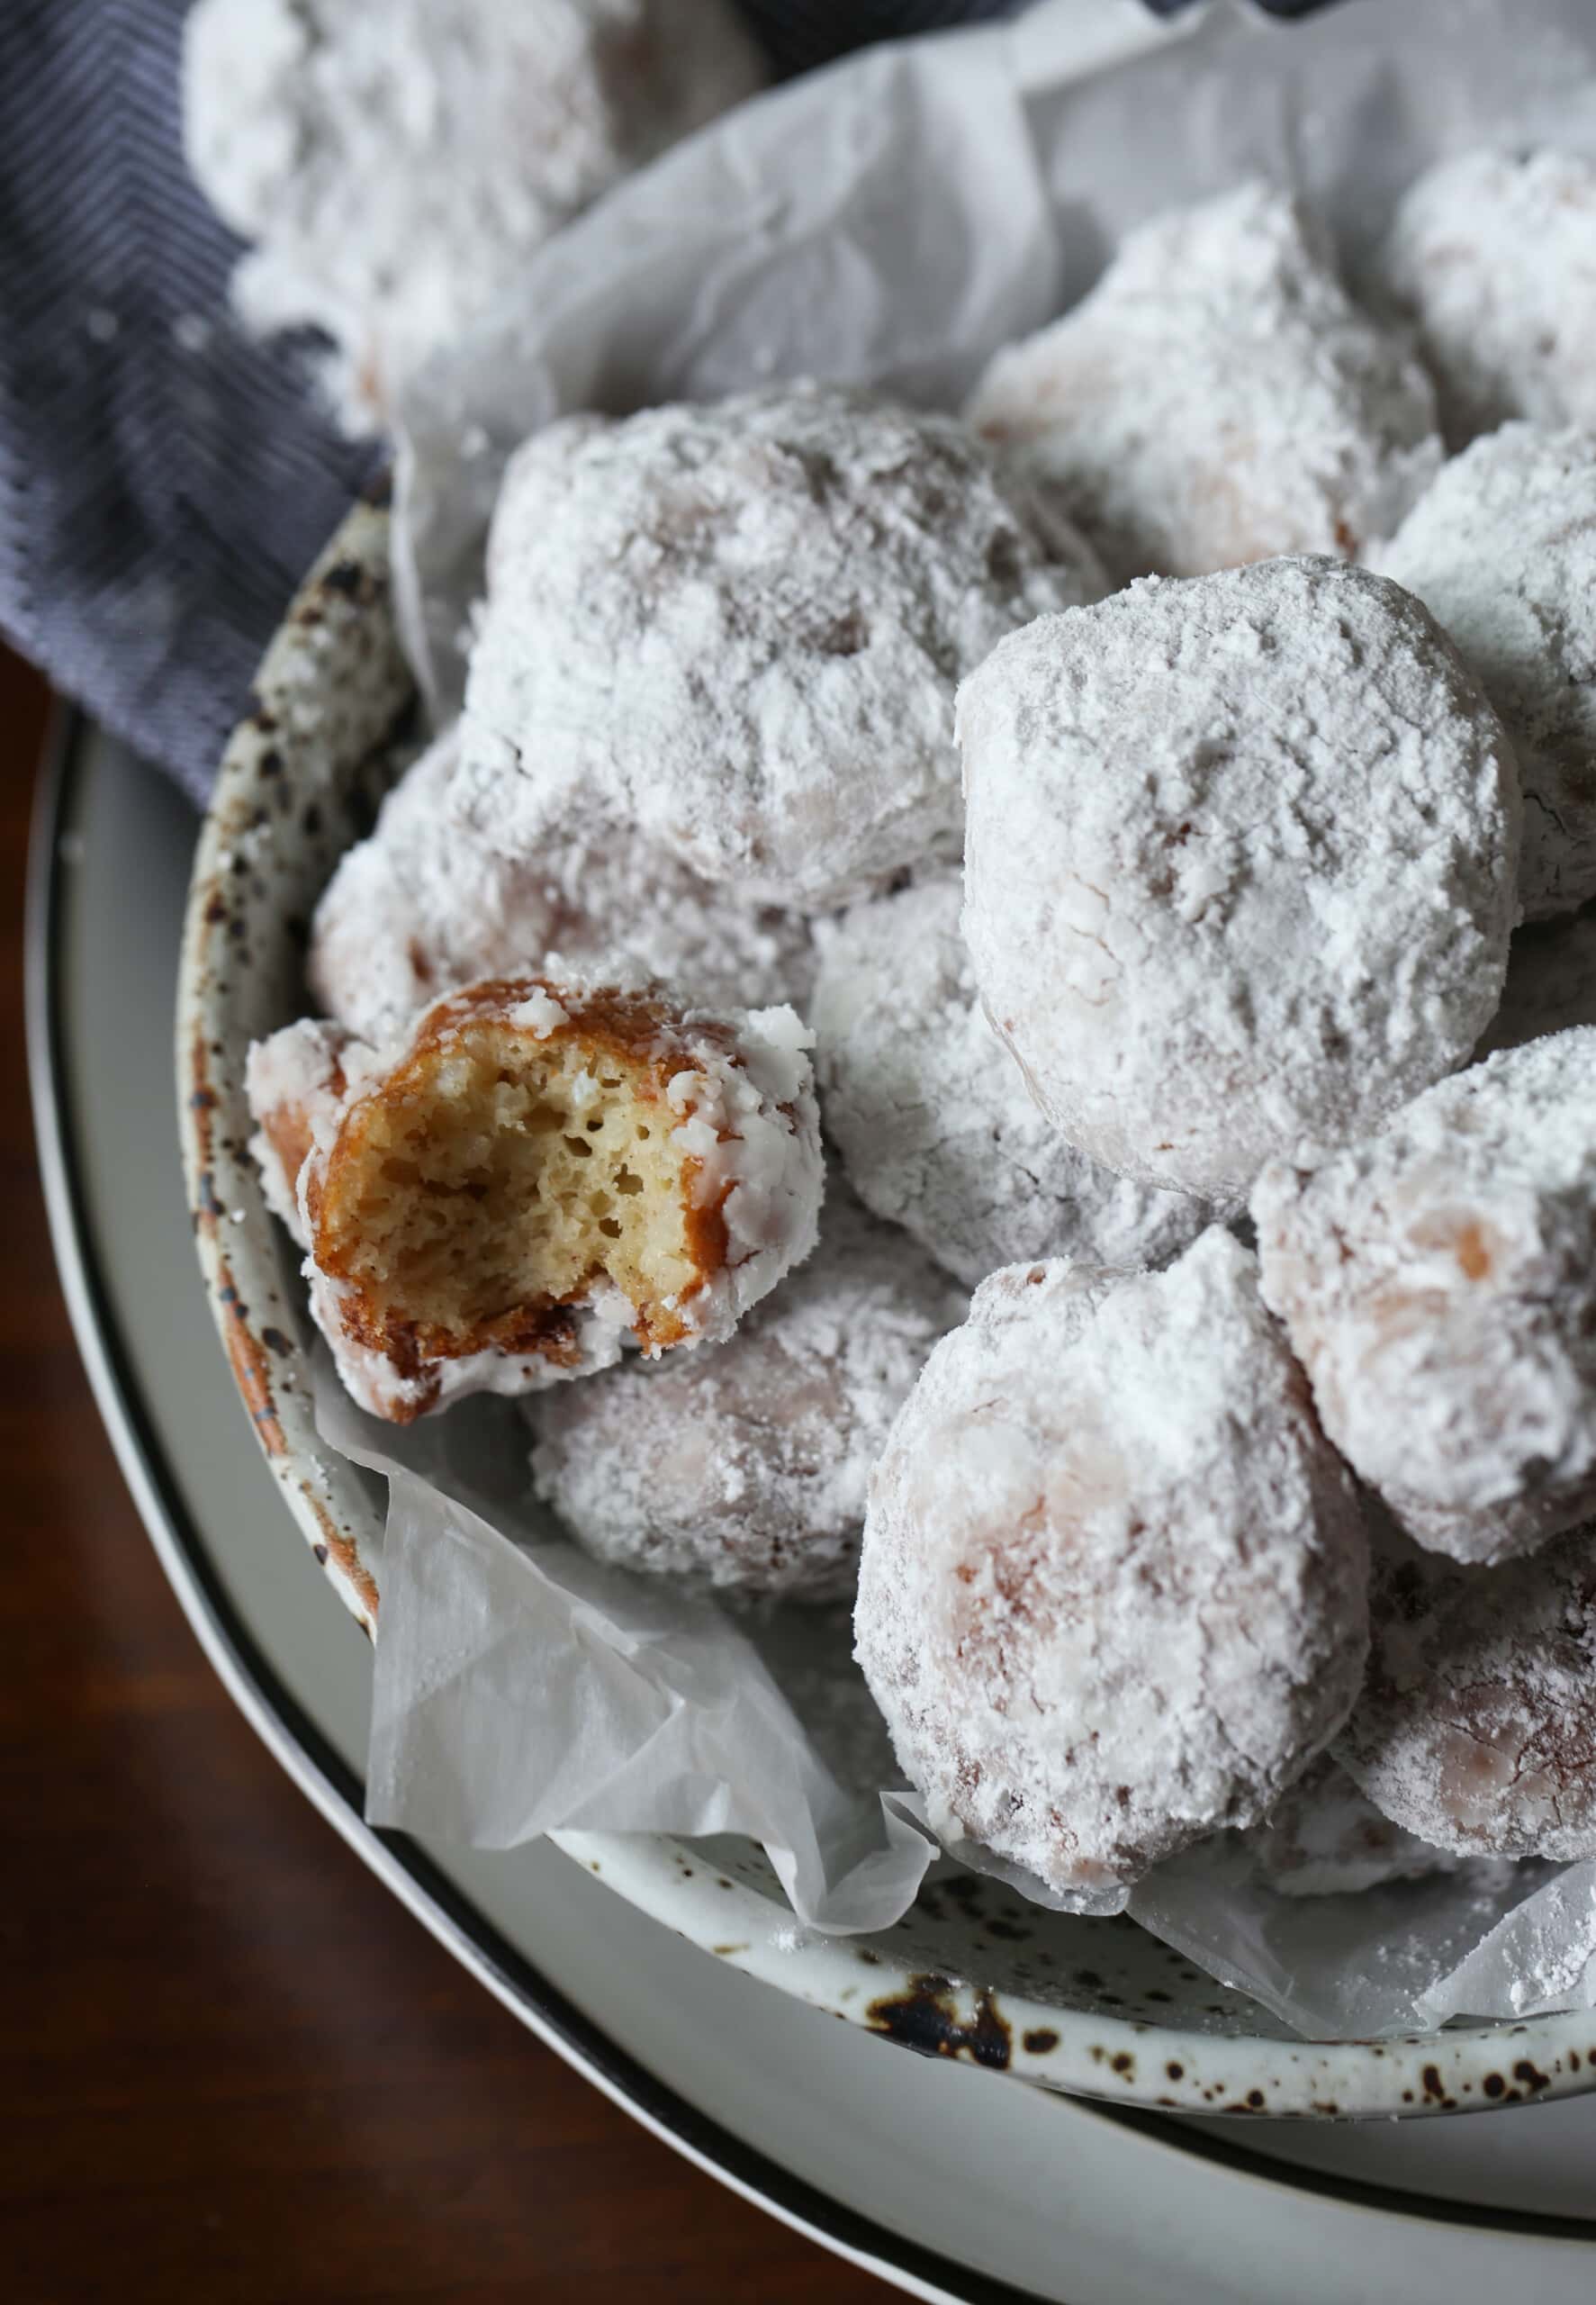 Sweet Calas in a bowl coated in powdered sugar with one cut in half showing interior